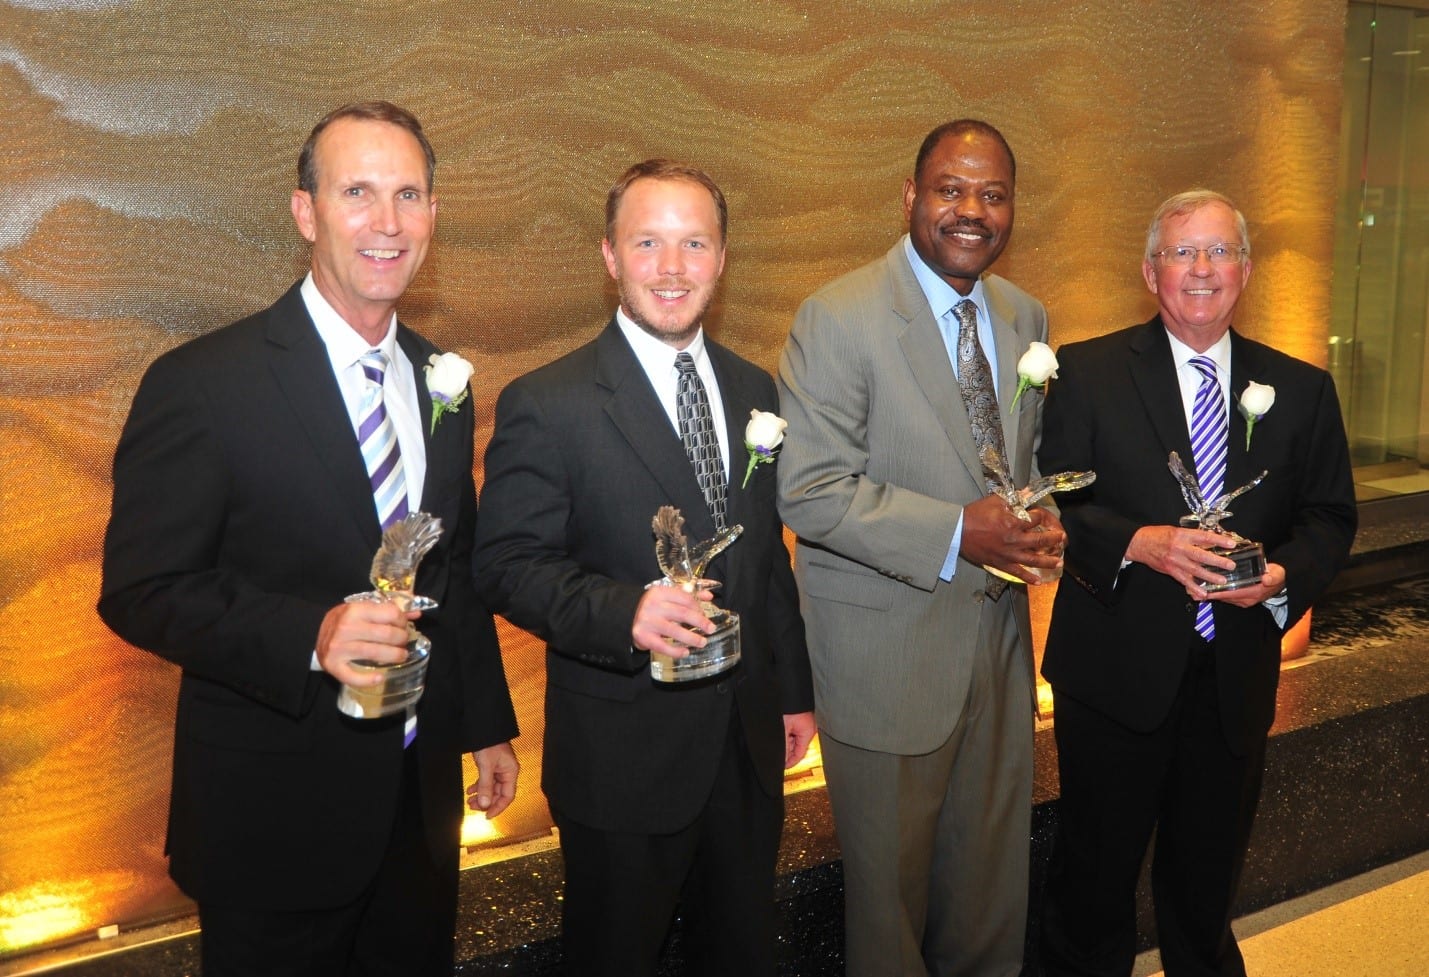 Four men in suits and ties holding trophies.